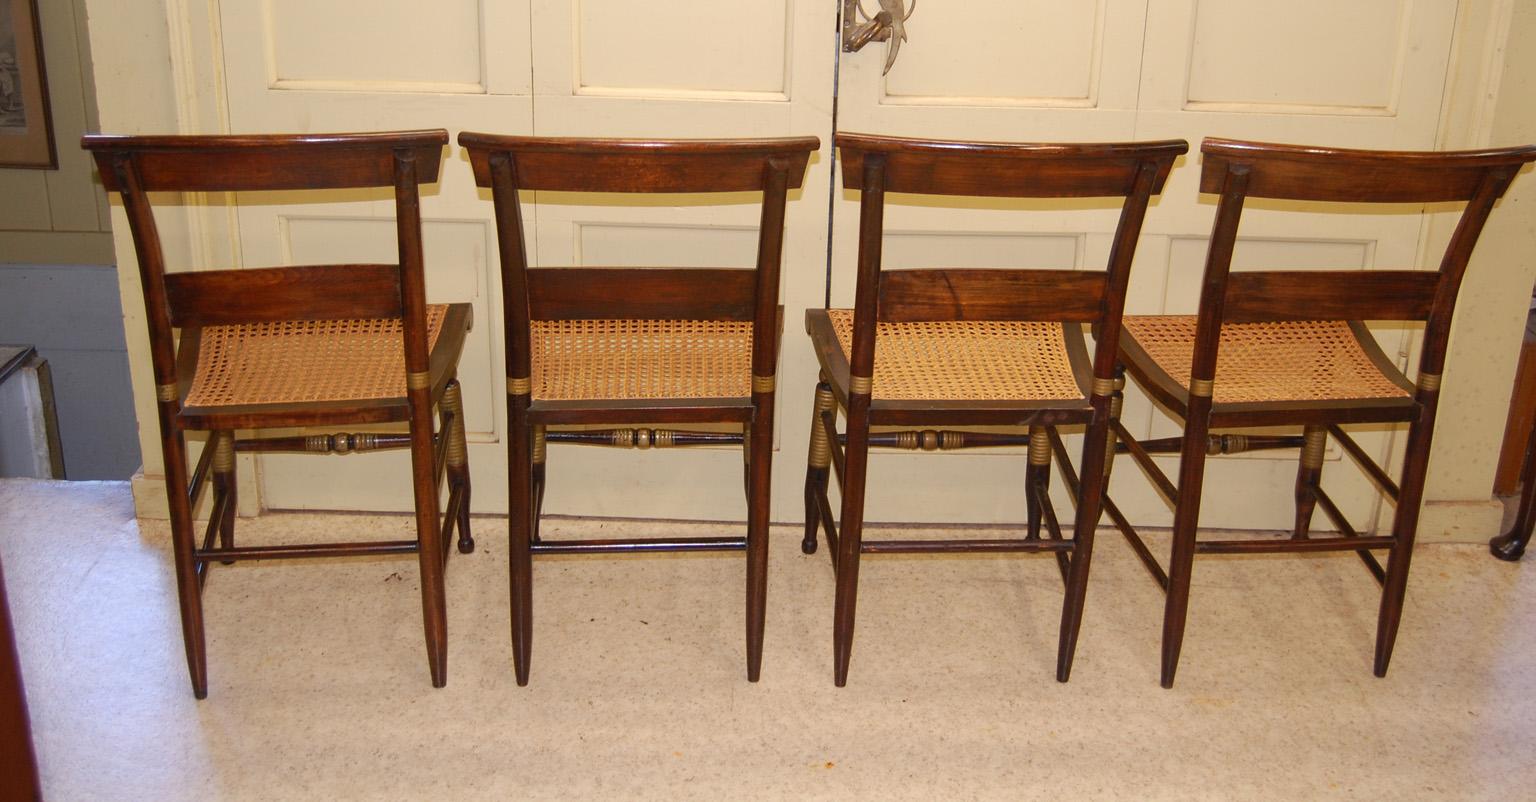   American Mid 19th Century grain painted set of four cane seated two slat side chairs of Hitchcock design.  The hand painted grain painting is superb and the legs have ring turnings  which are highlighted in gold.  There is a subtle gold line to